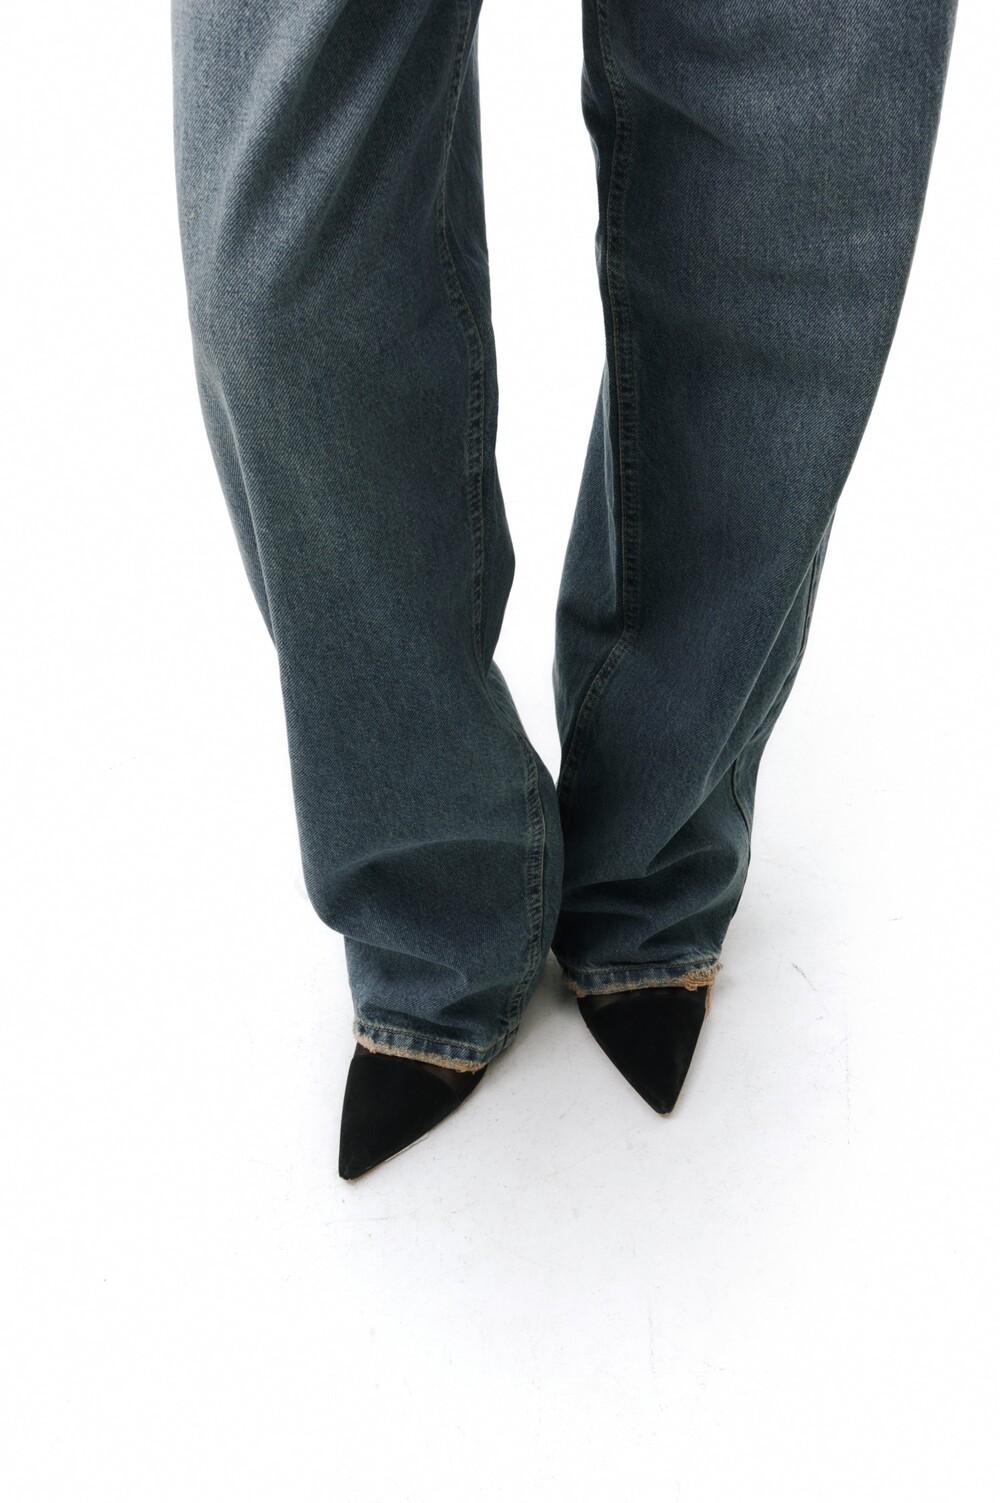 Relaxed jeans with a distressed effect